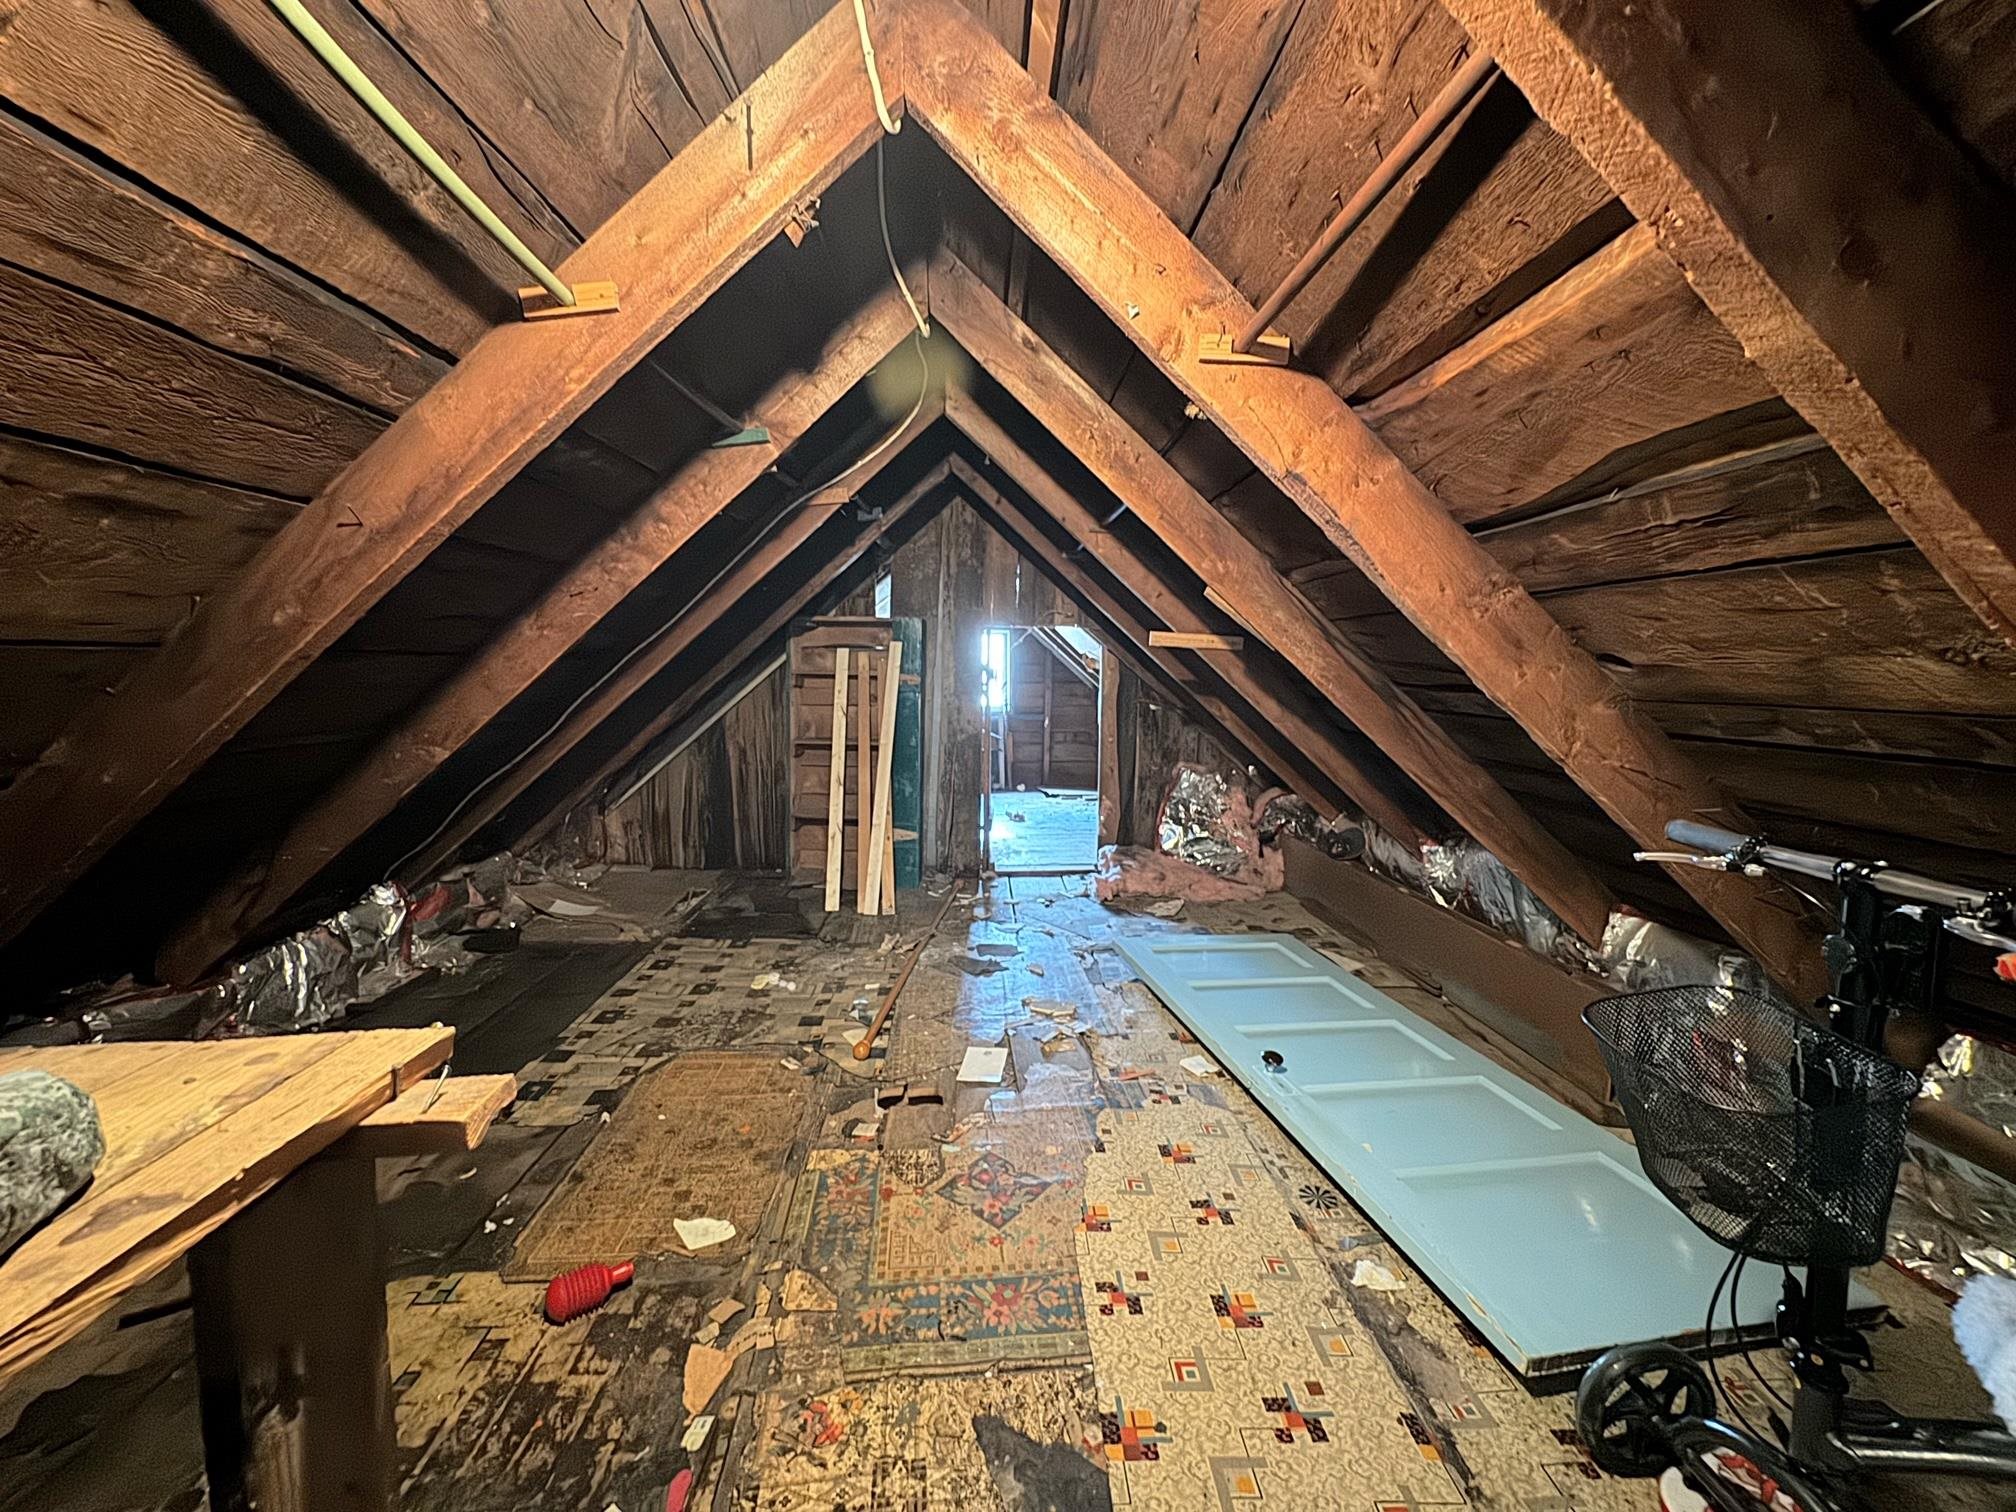 Attic accress off Bedroom #3. Could expand 1/4 bathroom